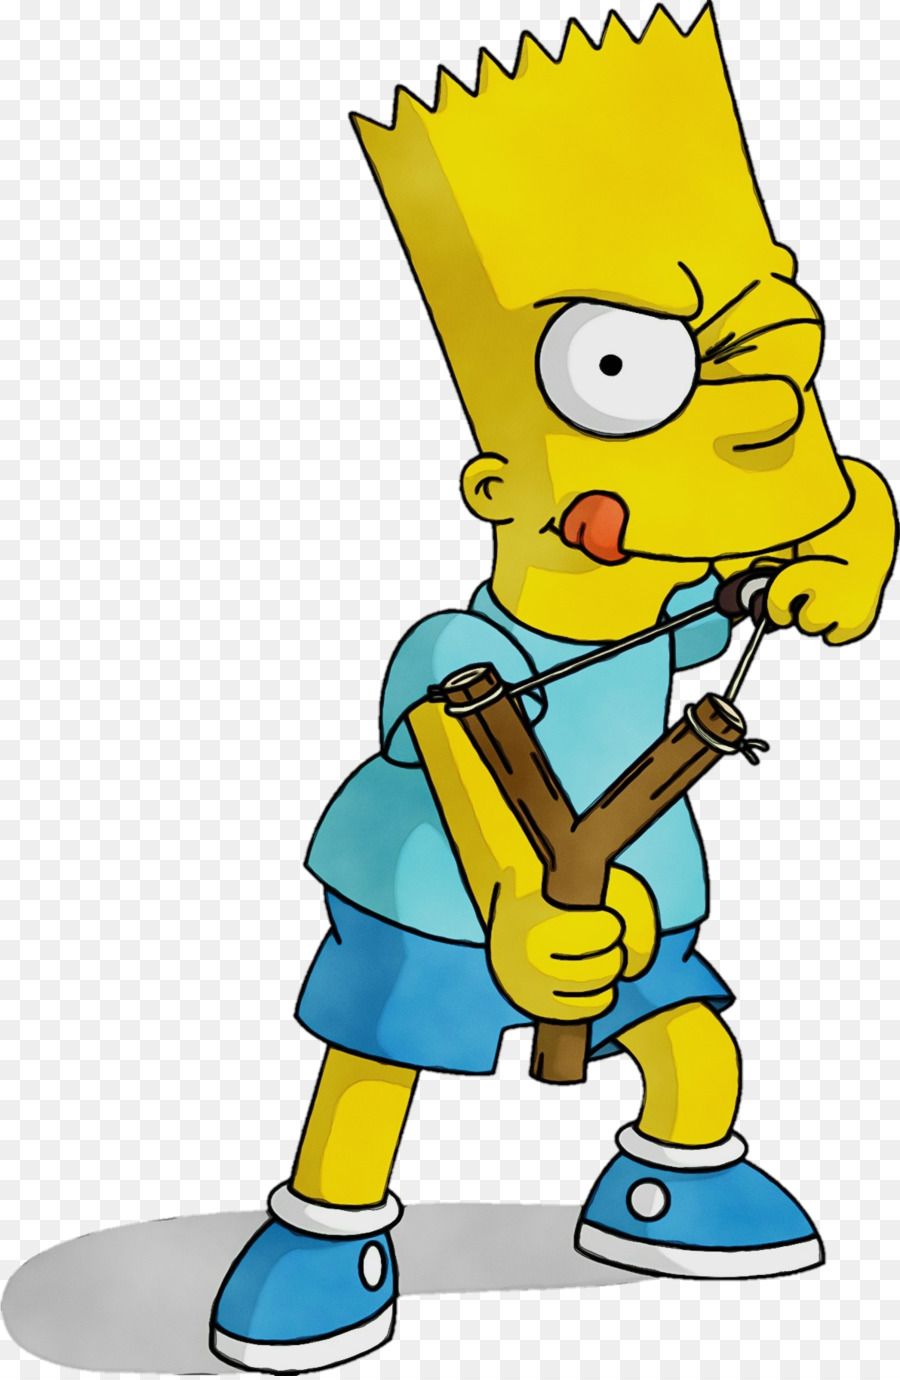 Bart Simpson Homer Simpson Marge Simpson Lisa Simpson The Simpsons Guy -  png download - 1193*1824 - Free Transparent Bart Simpson png Download.